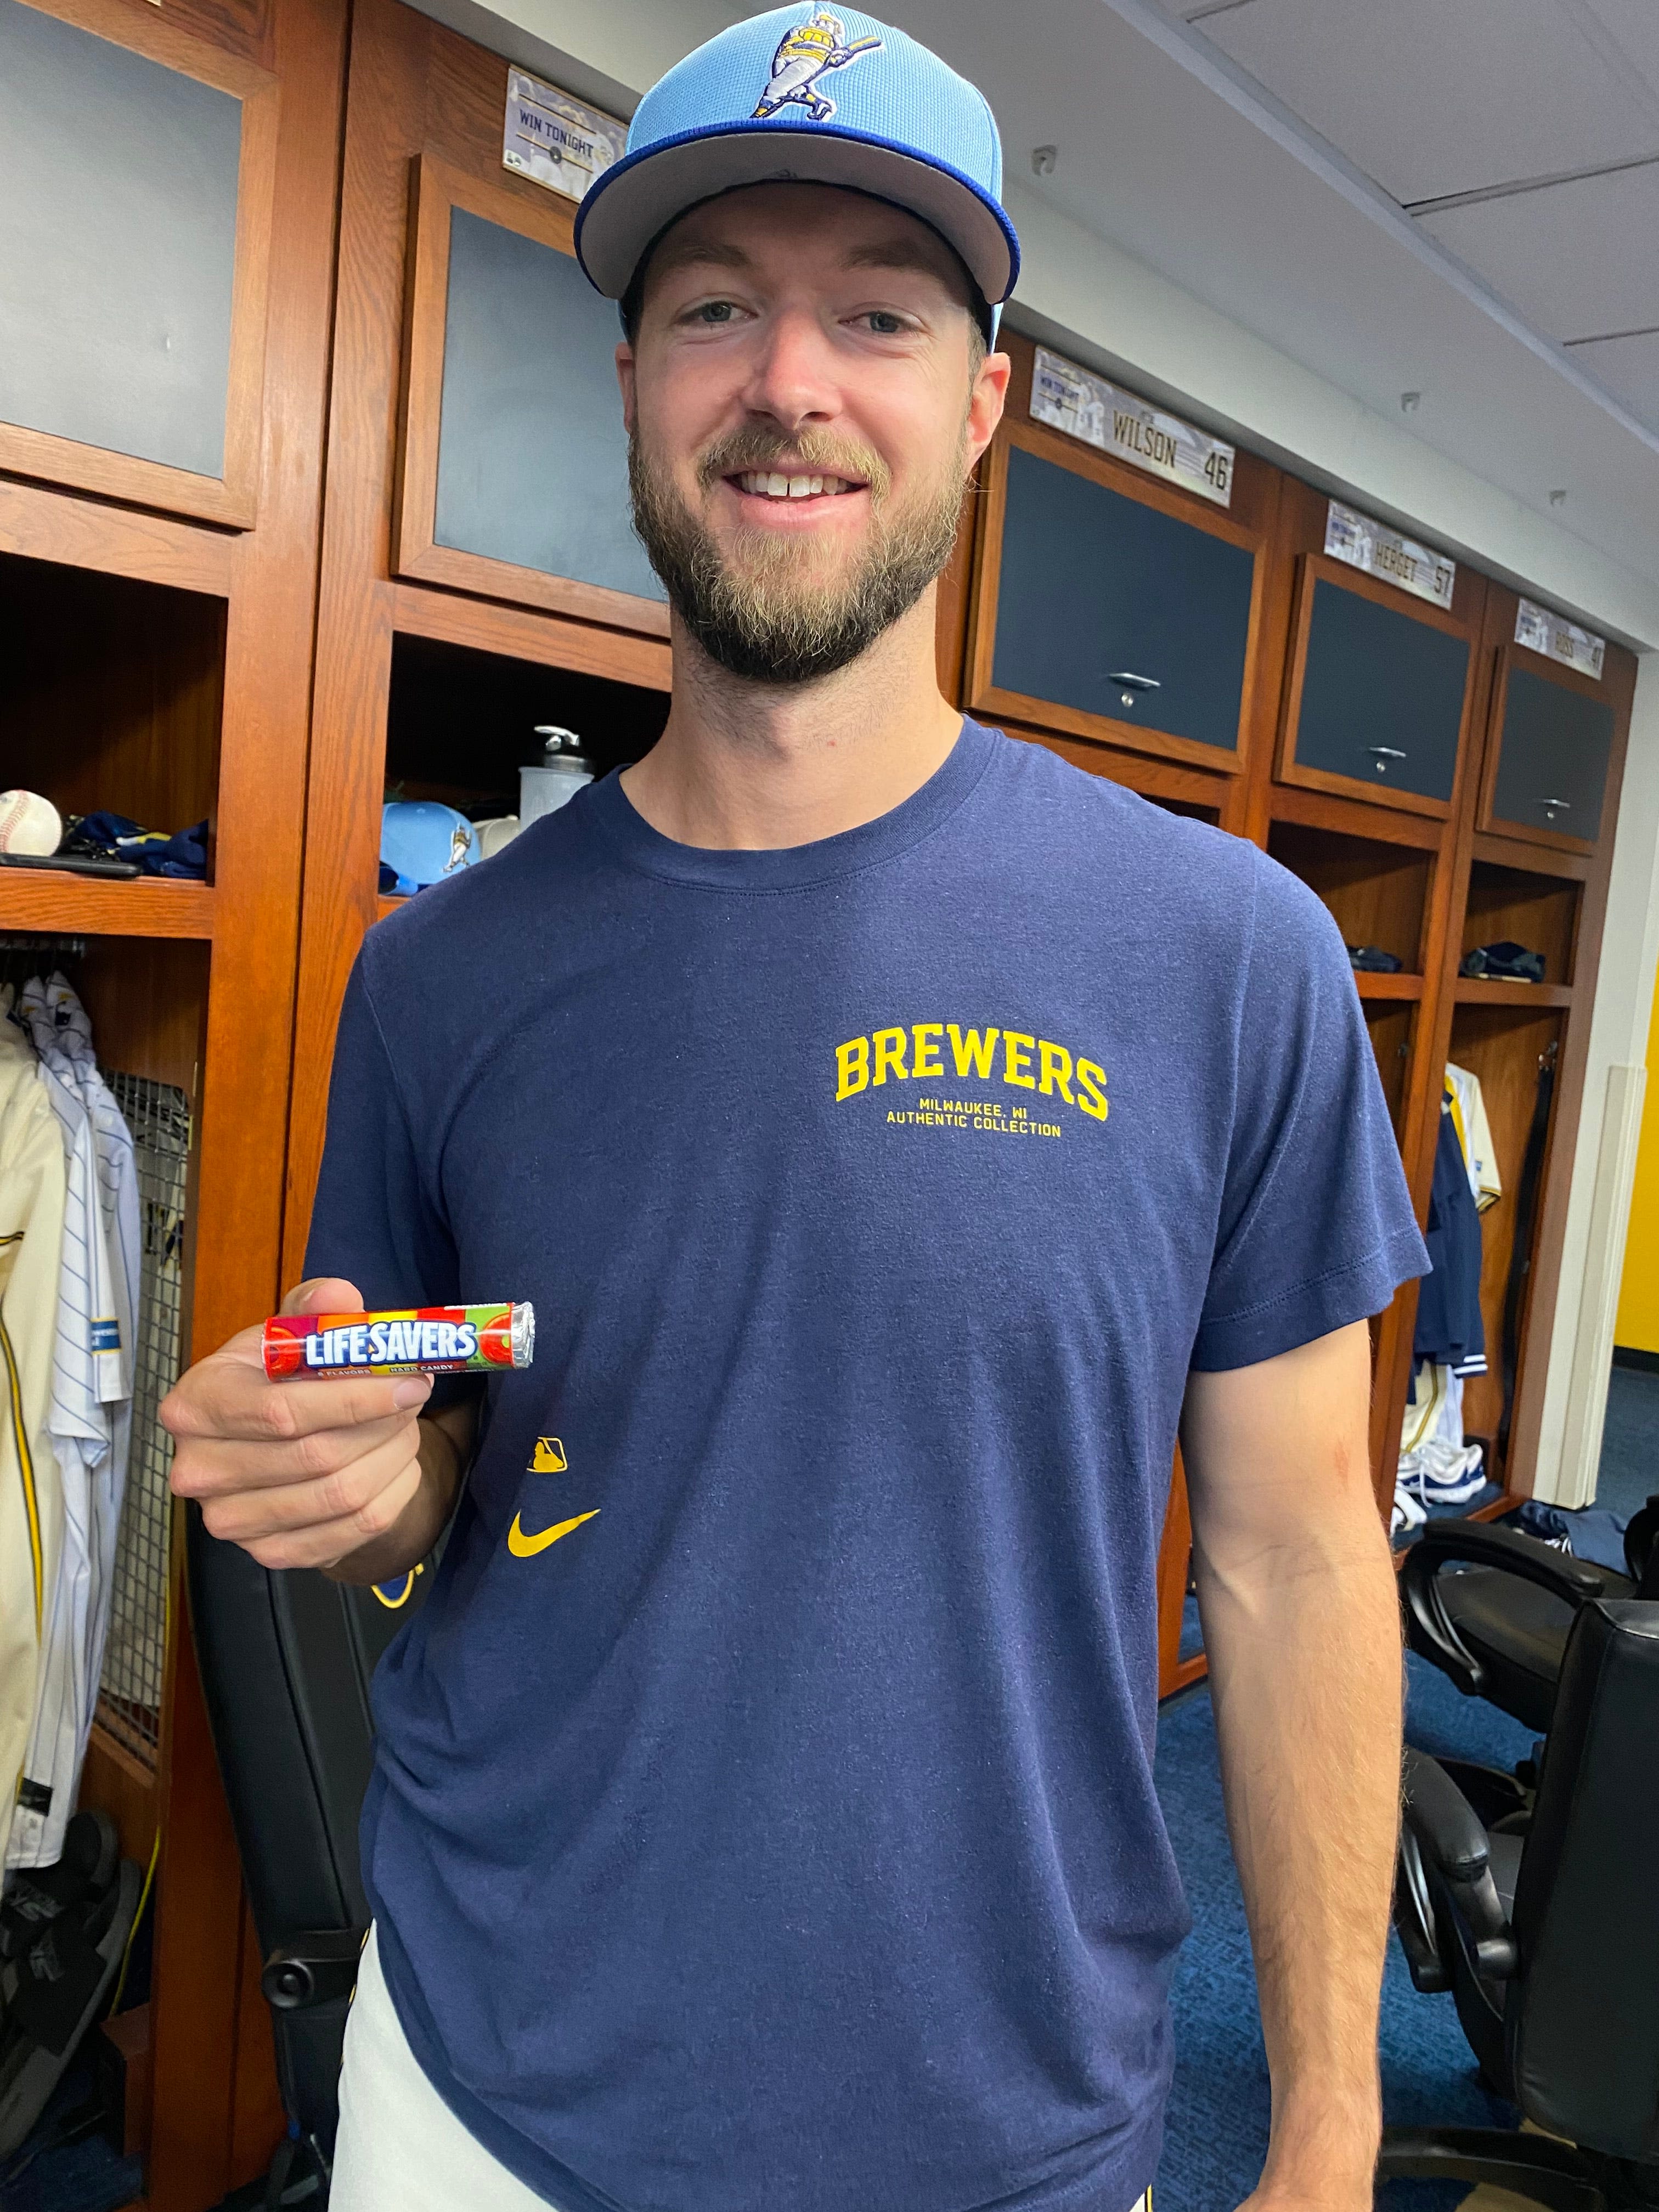 The 'orange Life Savers' of MLB: How a Pat Murphy theory on candy is central to the Brewers' winning ways